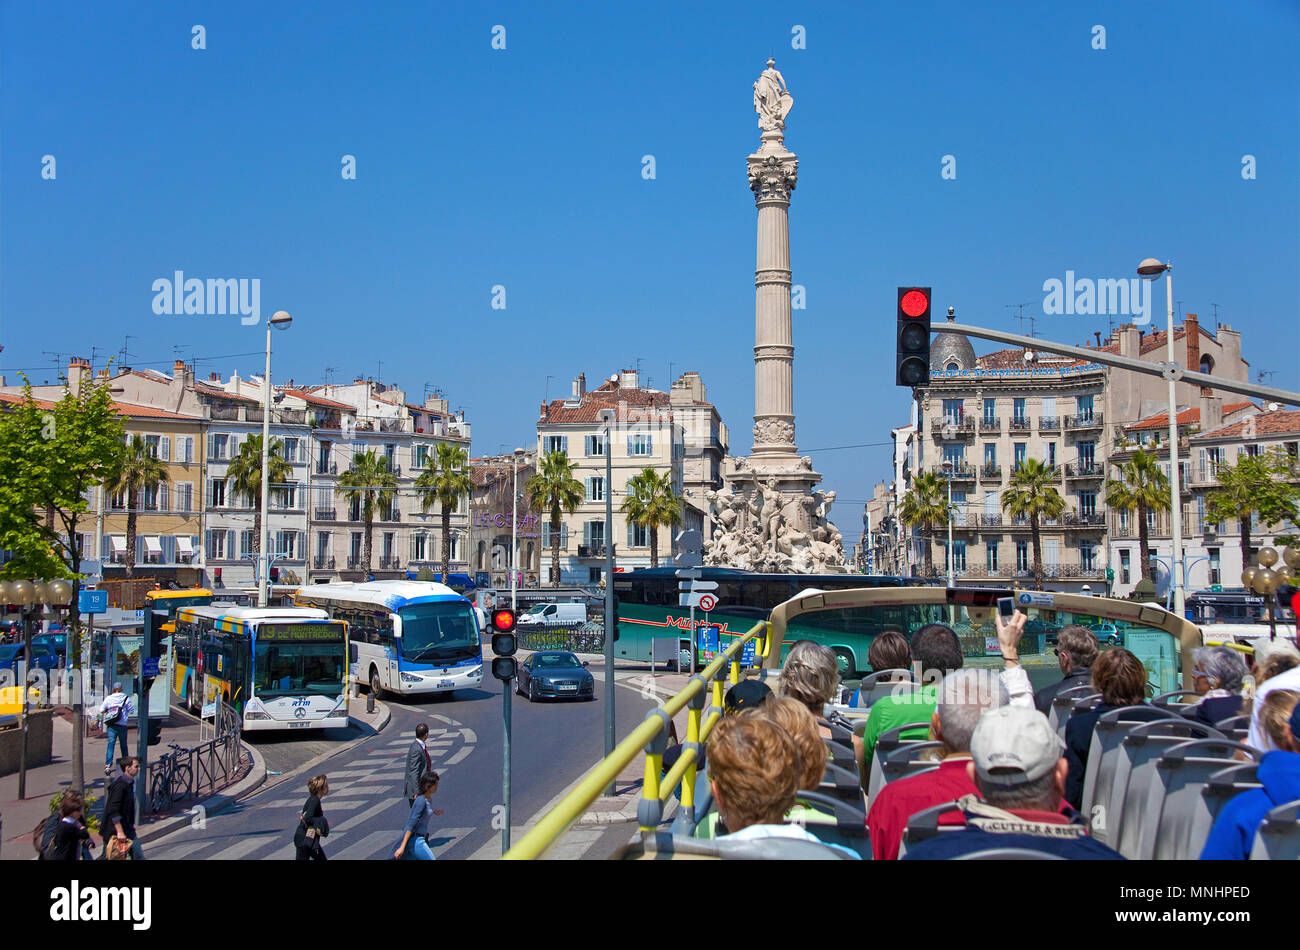 Sightsseing tour, tourists in a bus at place Catellane, Marseille, Bouches-du-Rhone, Provence-Alpes-Côte d’Azur, South France, France, Europe Stock Photo